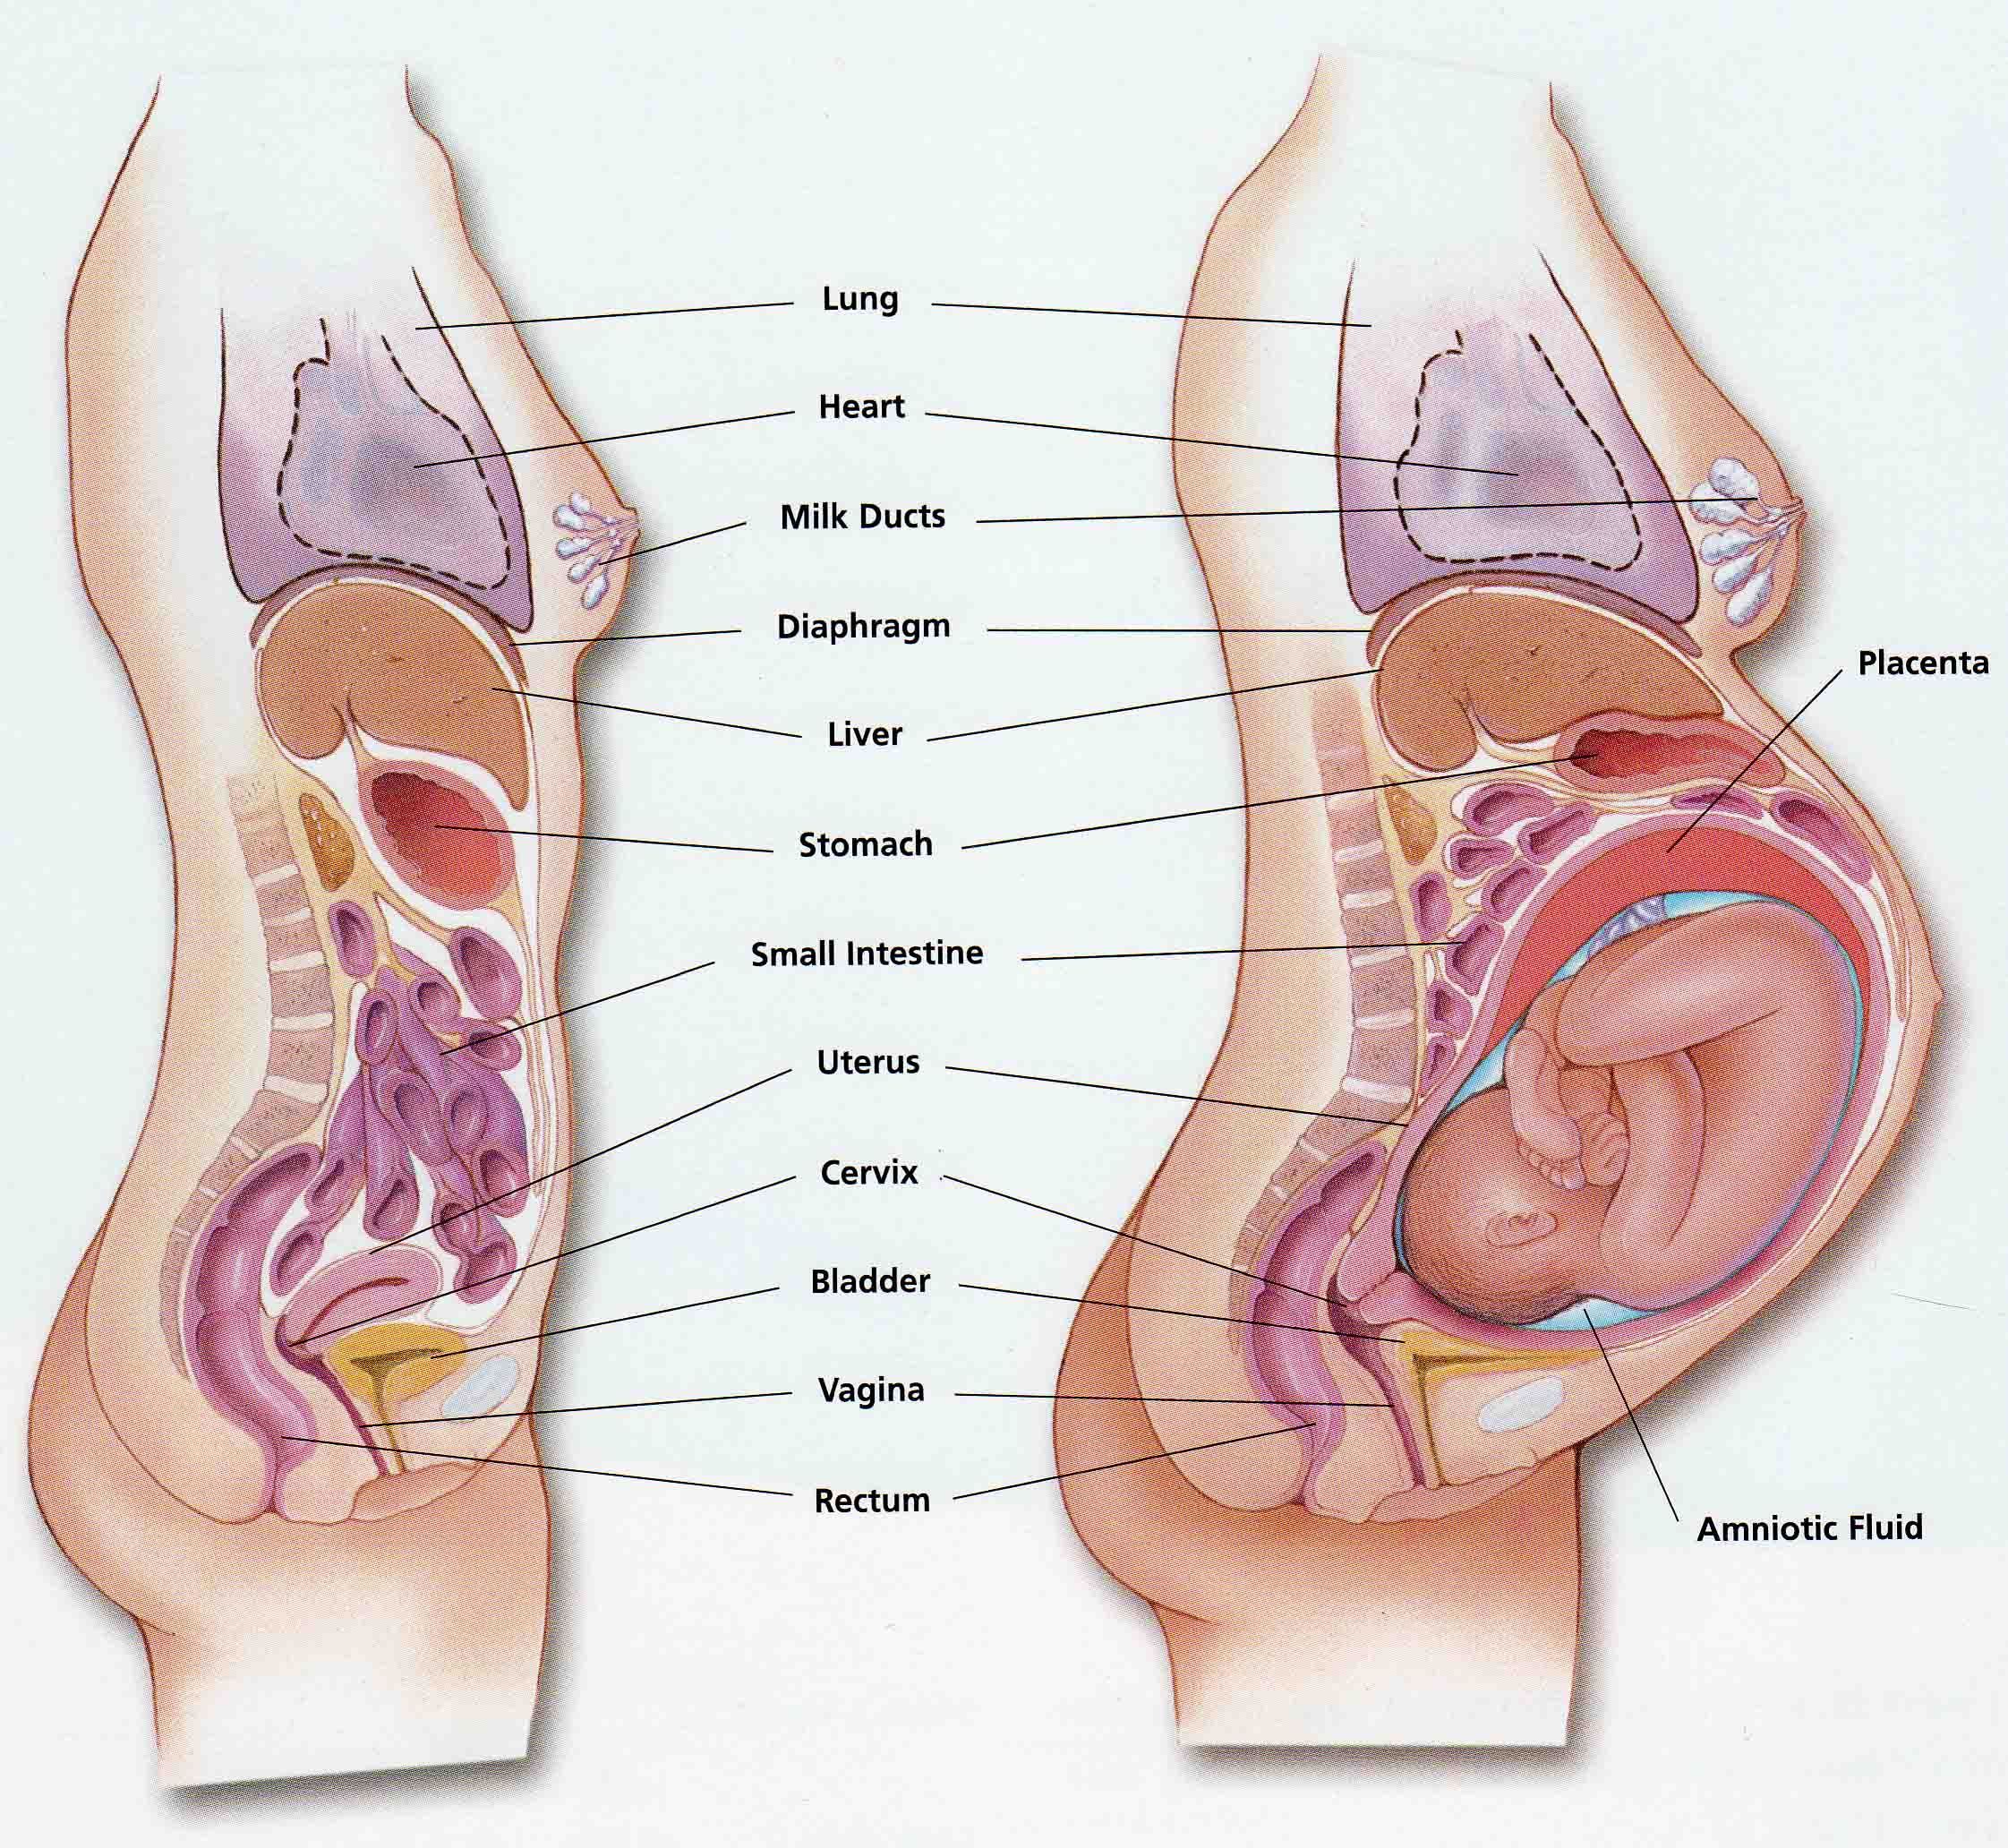 absolutely love this diagram. shows pregnant body/anatomy/organs